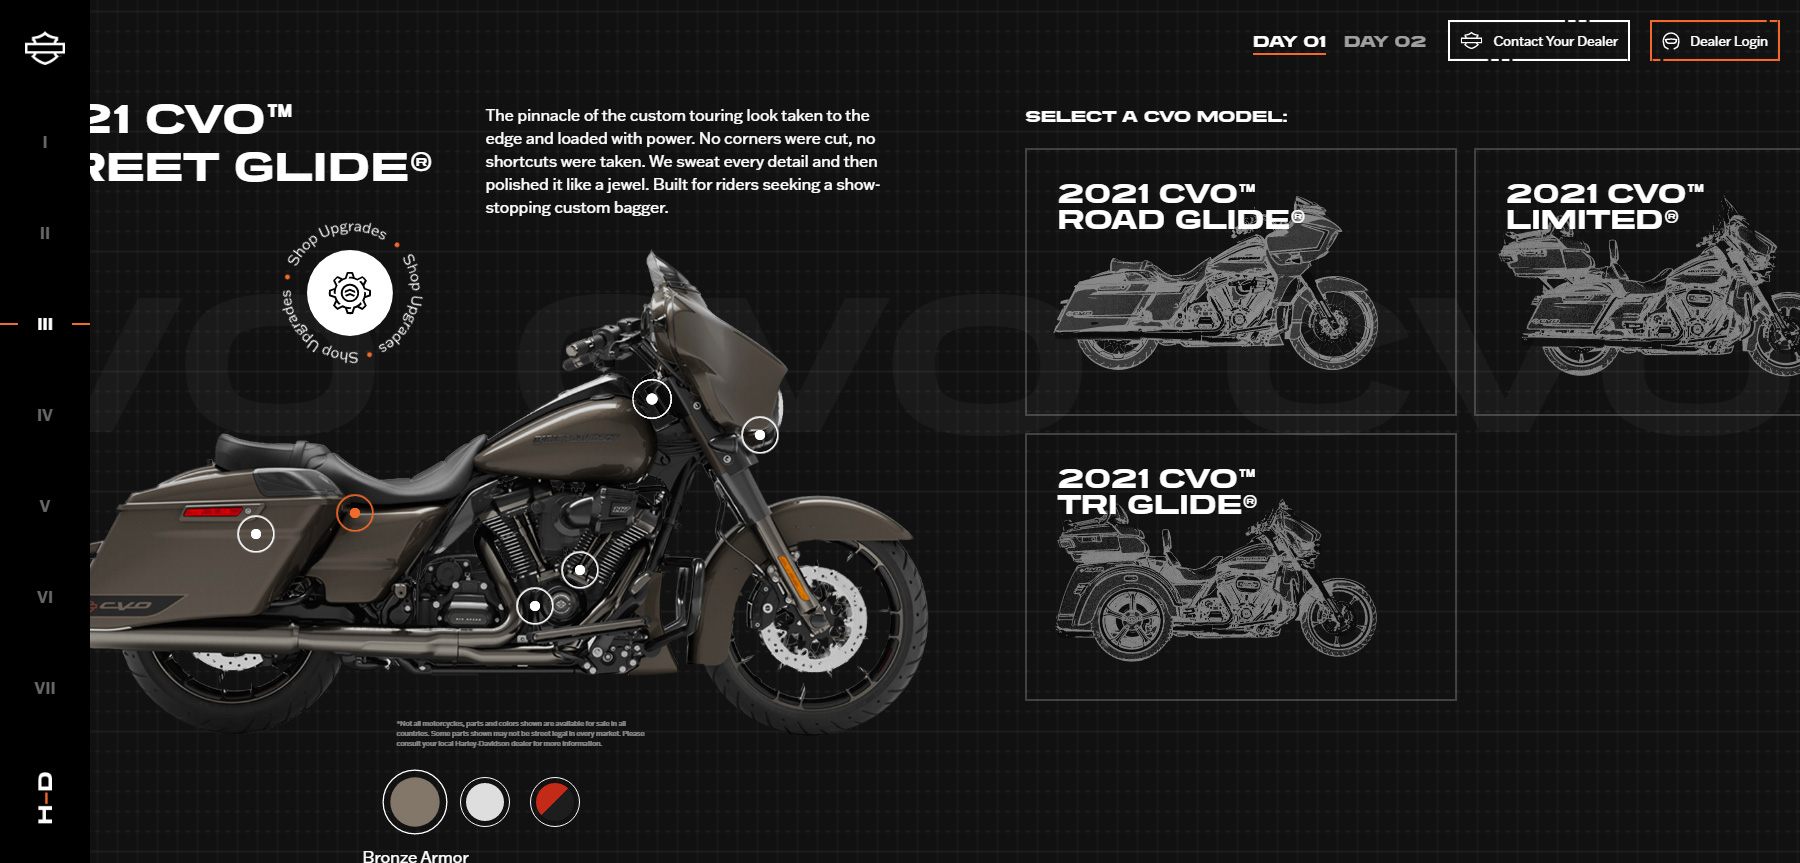 Harley-Davidson: H-D 21 Microsite - Website of the Day